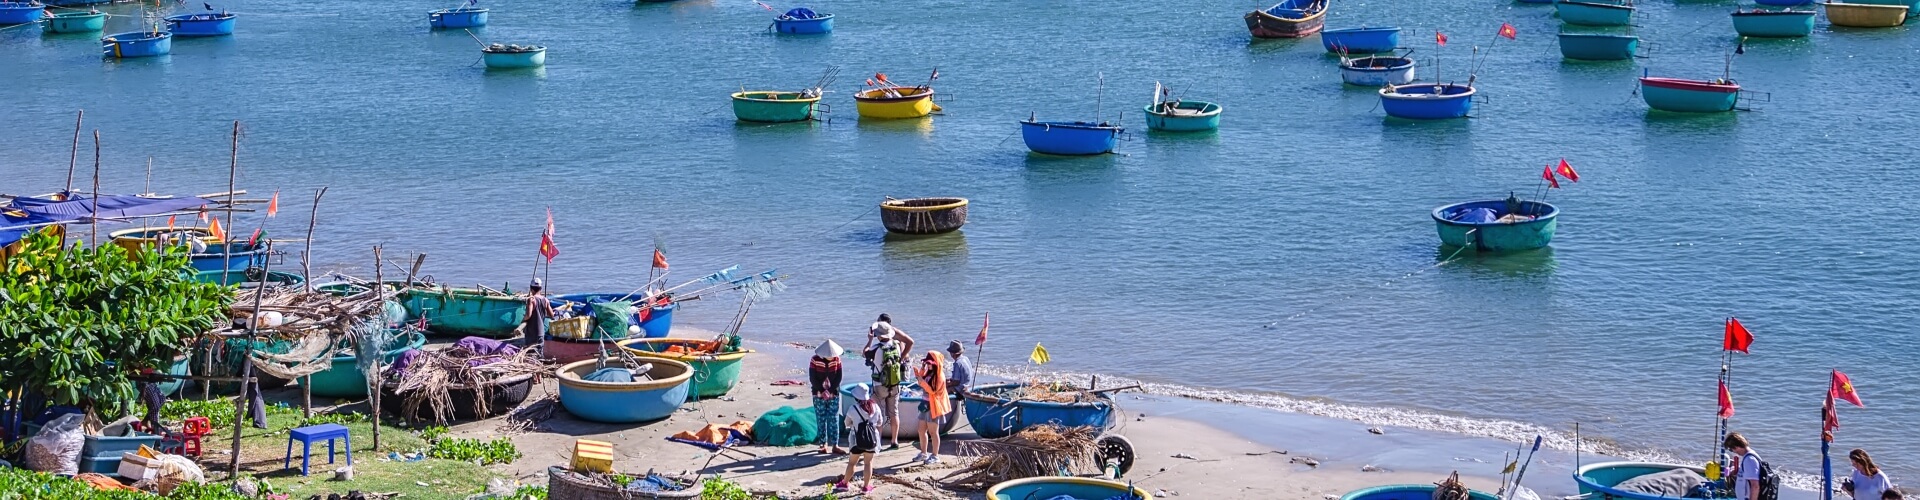 A collection of colourful boats on the shoreline and in the water at a beach in the south of Vietnam